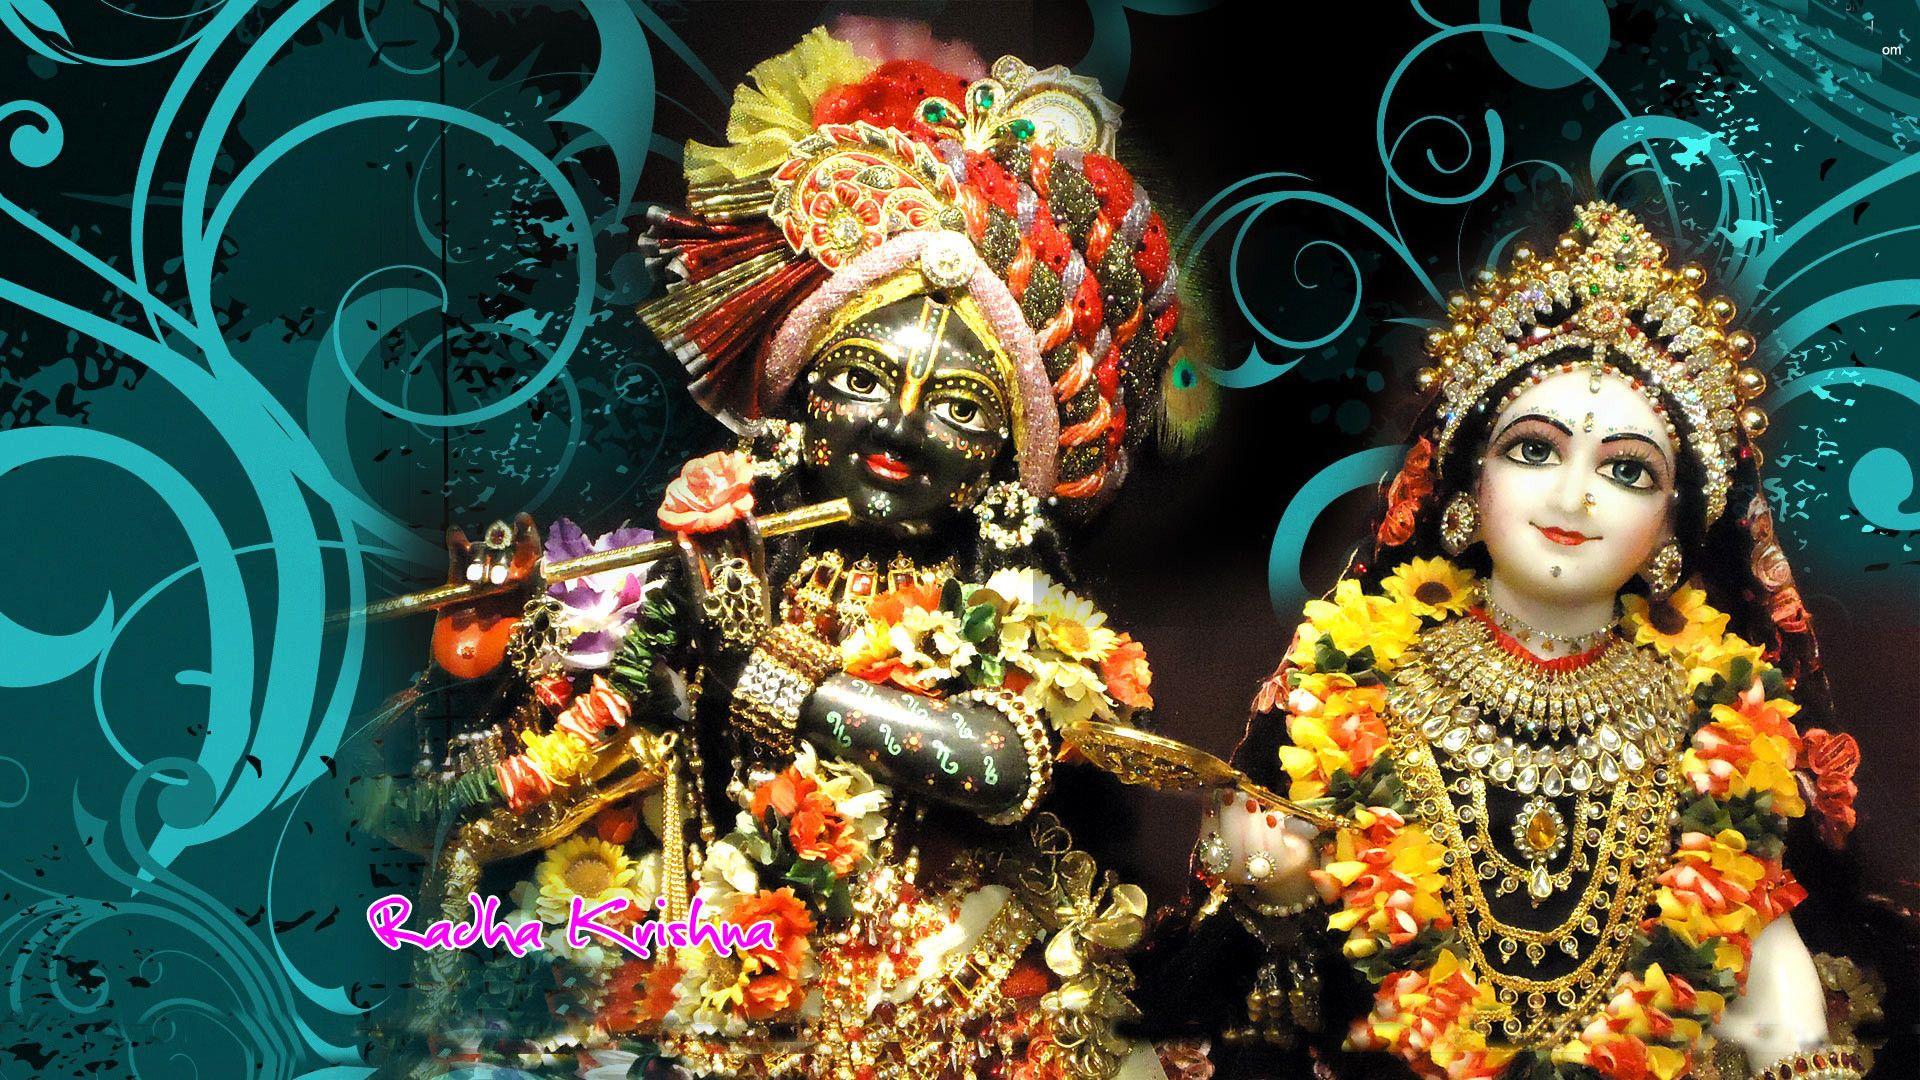 1920x1080 Quotes: Lord krishna HD wallpaper for iphone 56 Wallpaper